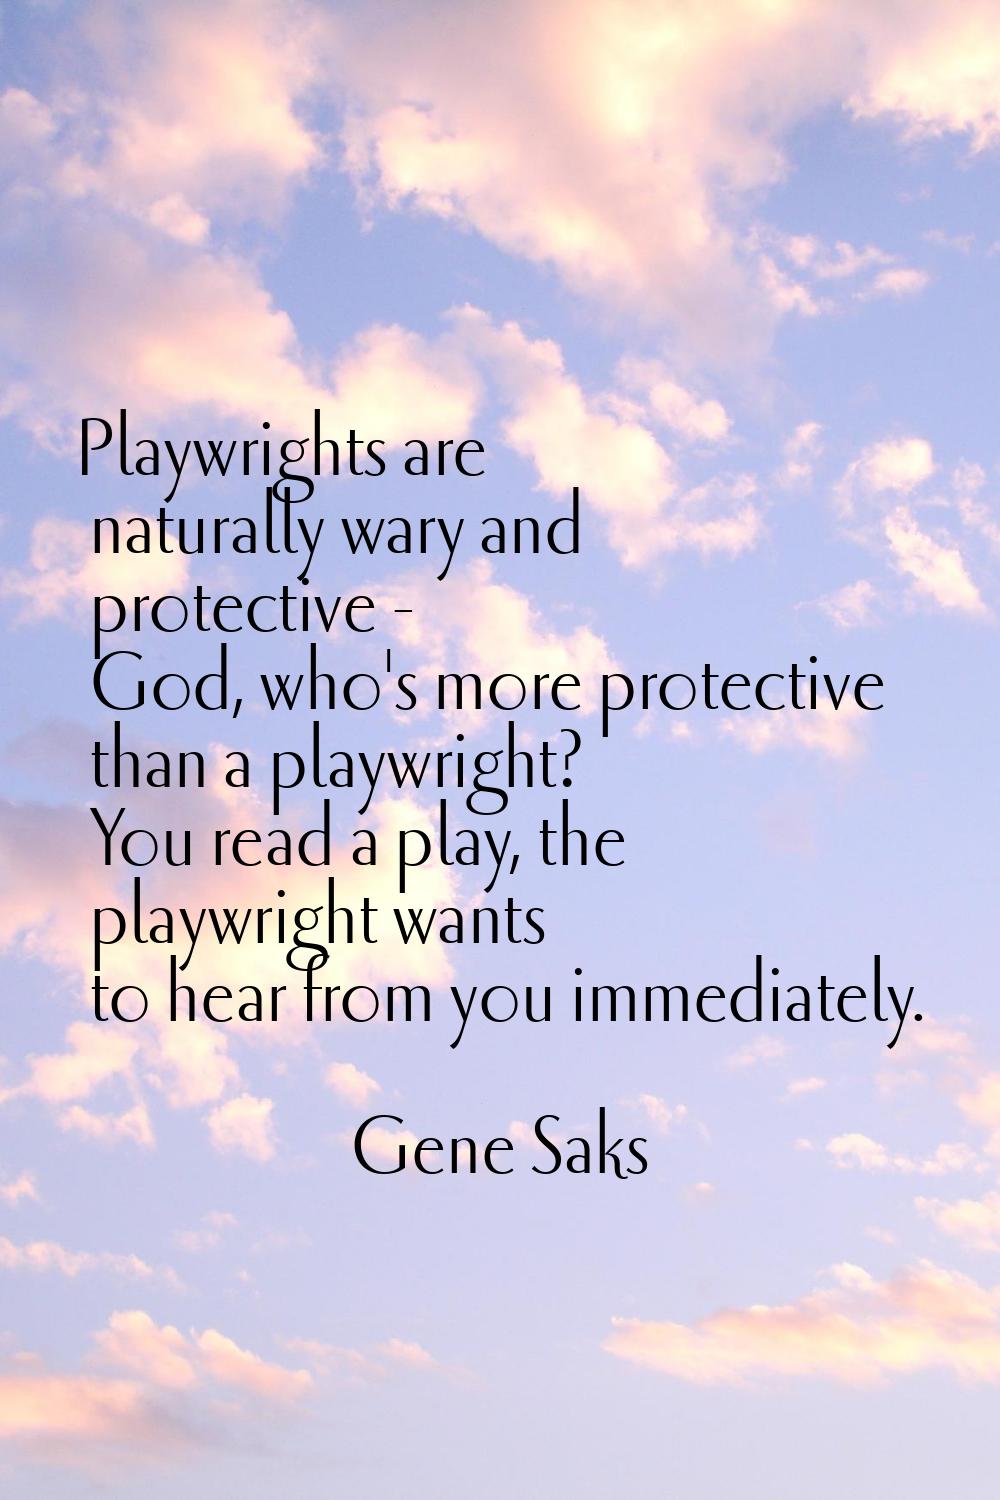 Playwrights are naturally wary and protective - God, who's more protective than a playwright? You r